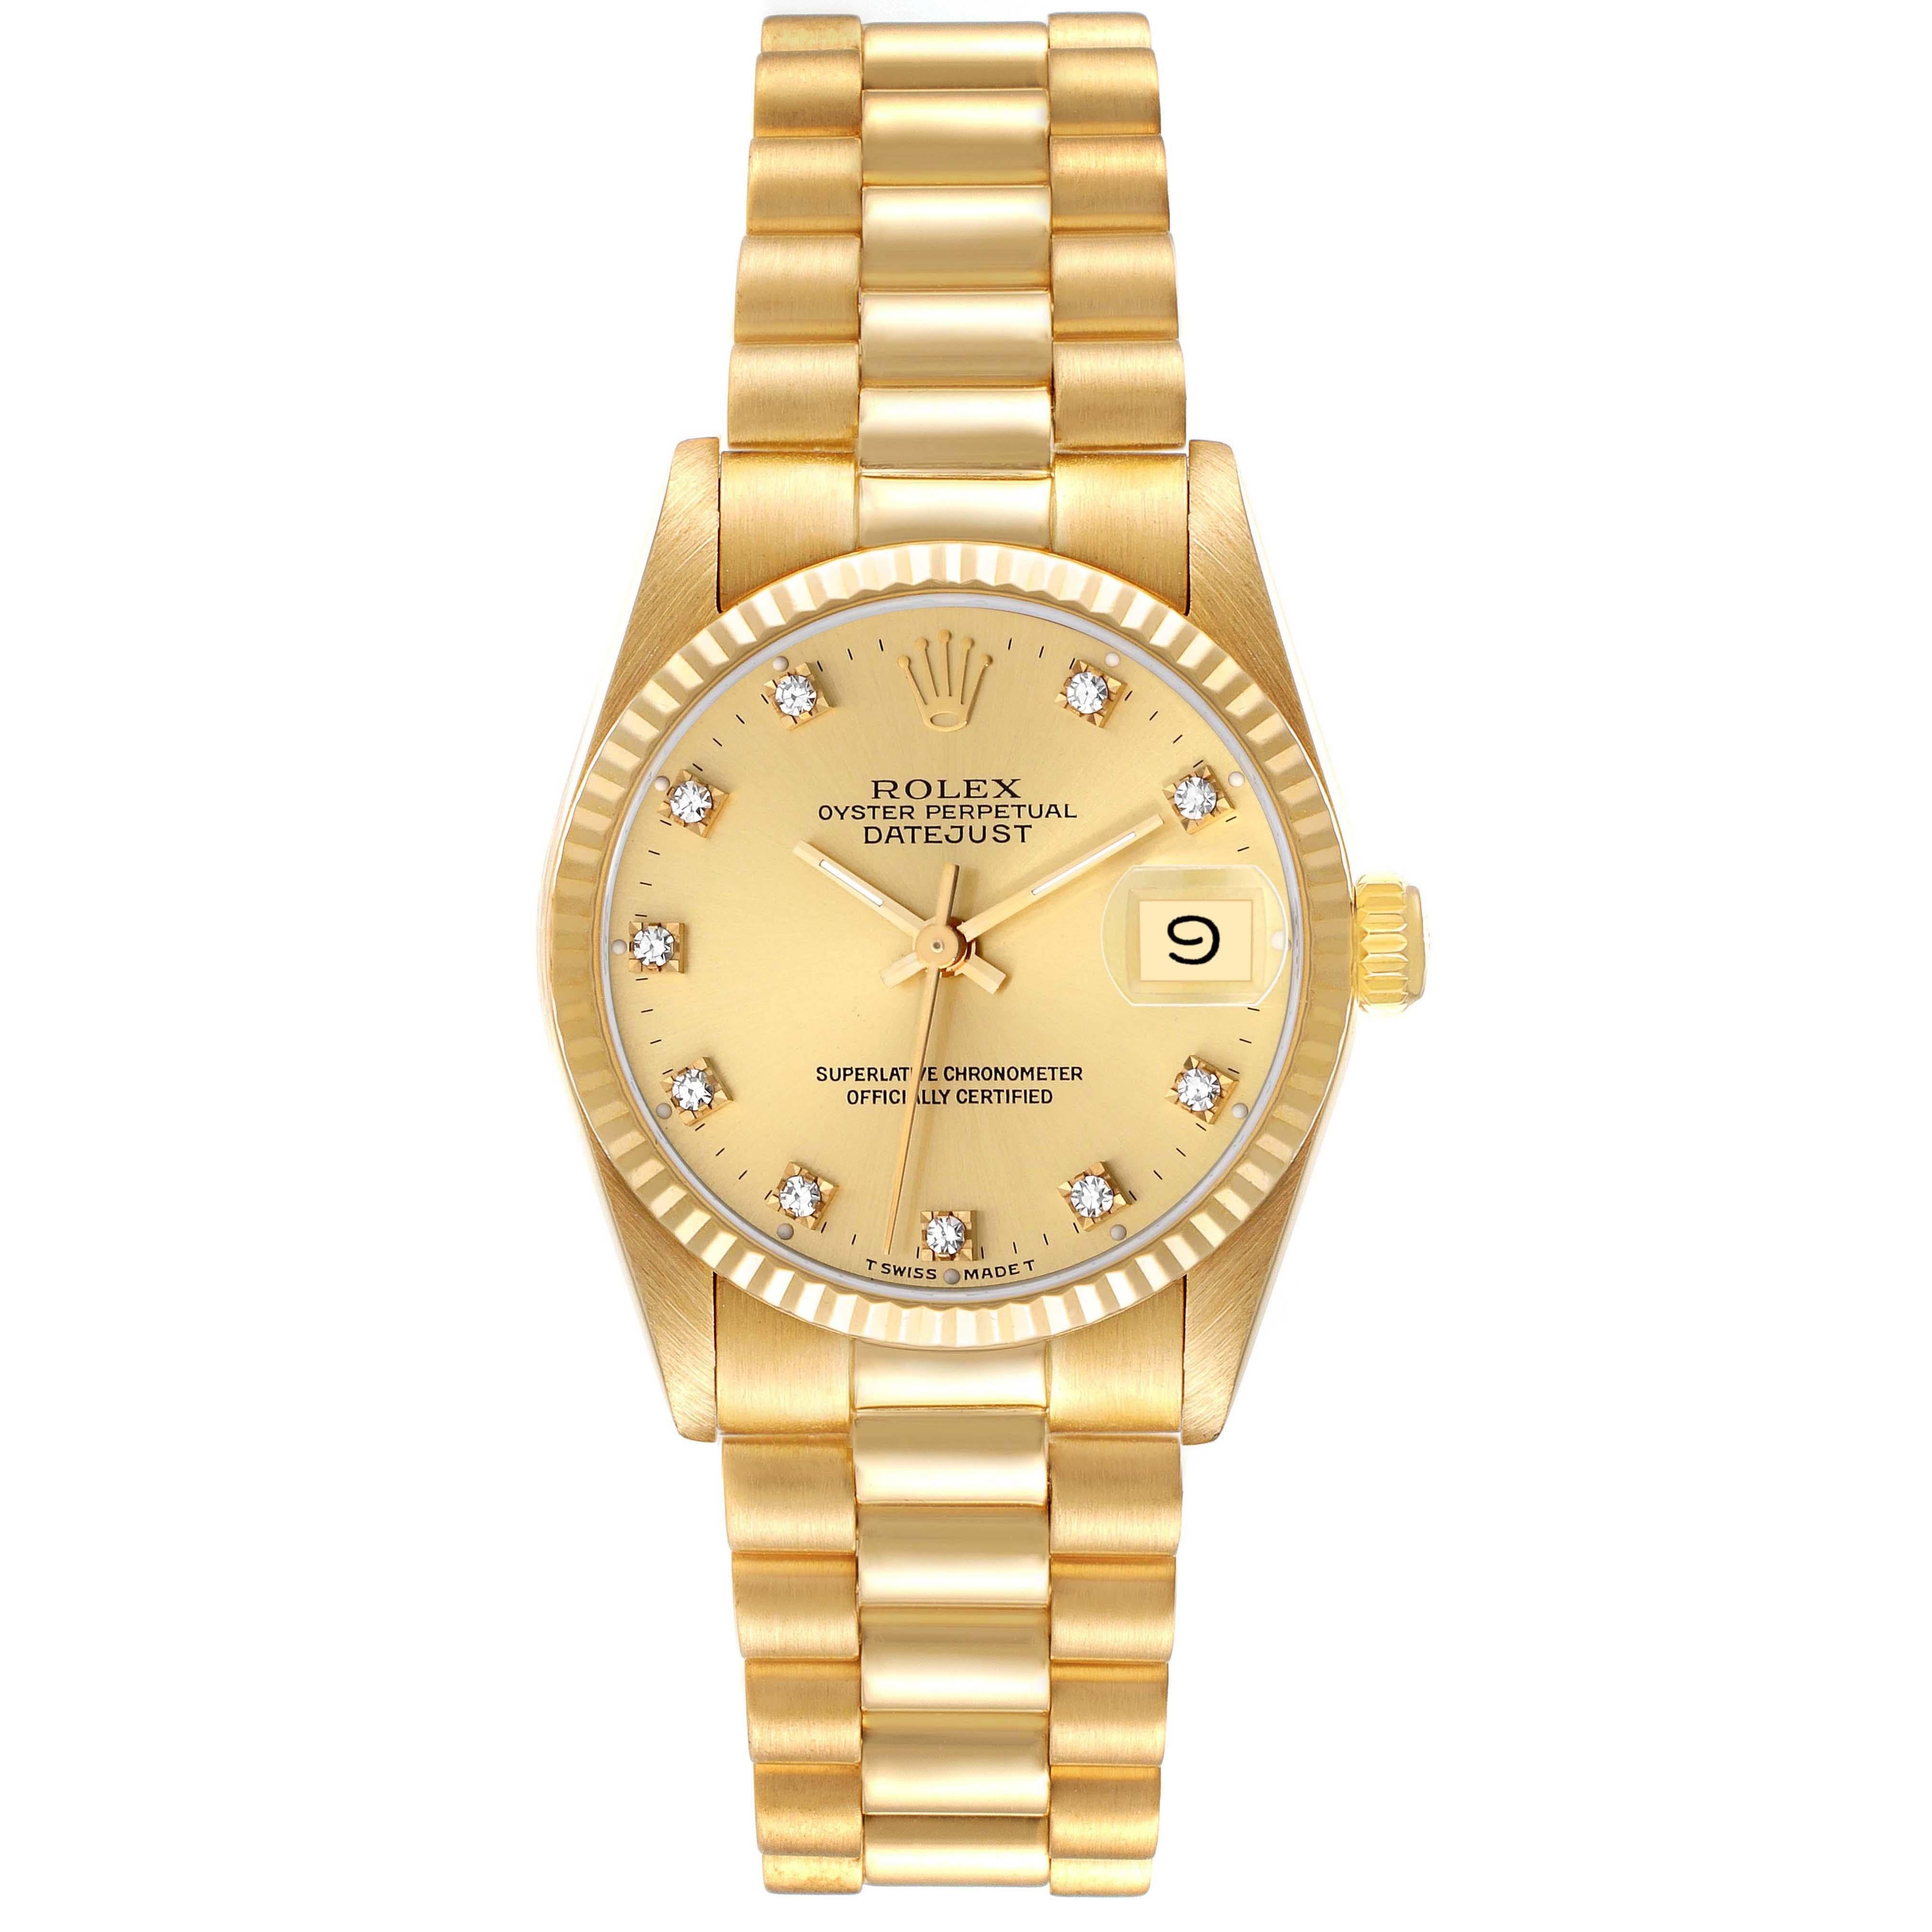 Rolex President Datejust Midsize 31 Yellow Gold Diamond Ladies Watch 68278. Officially certified chronometer automatic self-winding movement. 18k yellow gold oyster case 31.0 mm in diameter. Rolex logo on the crown. 18k yellow gold fluted bezel.